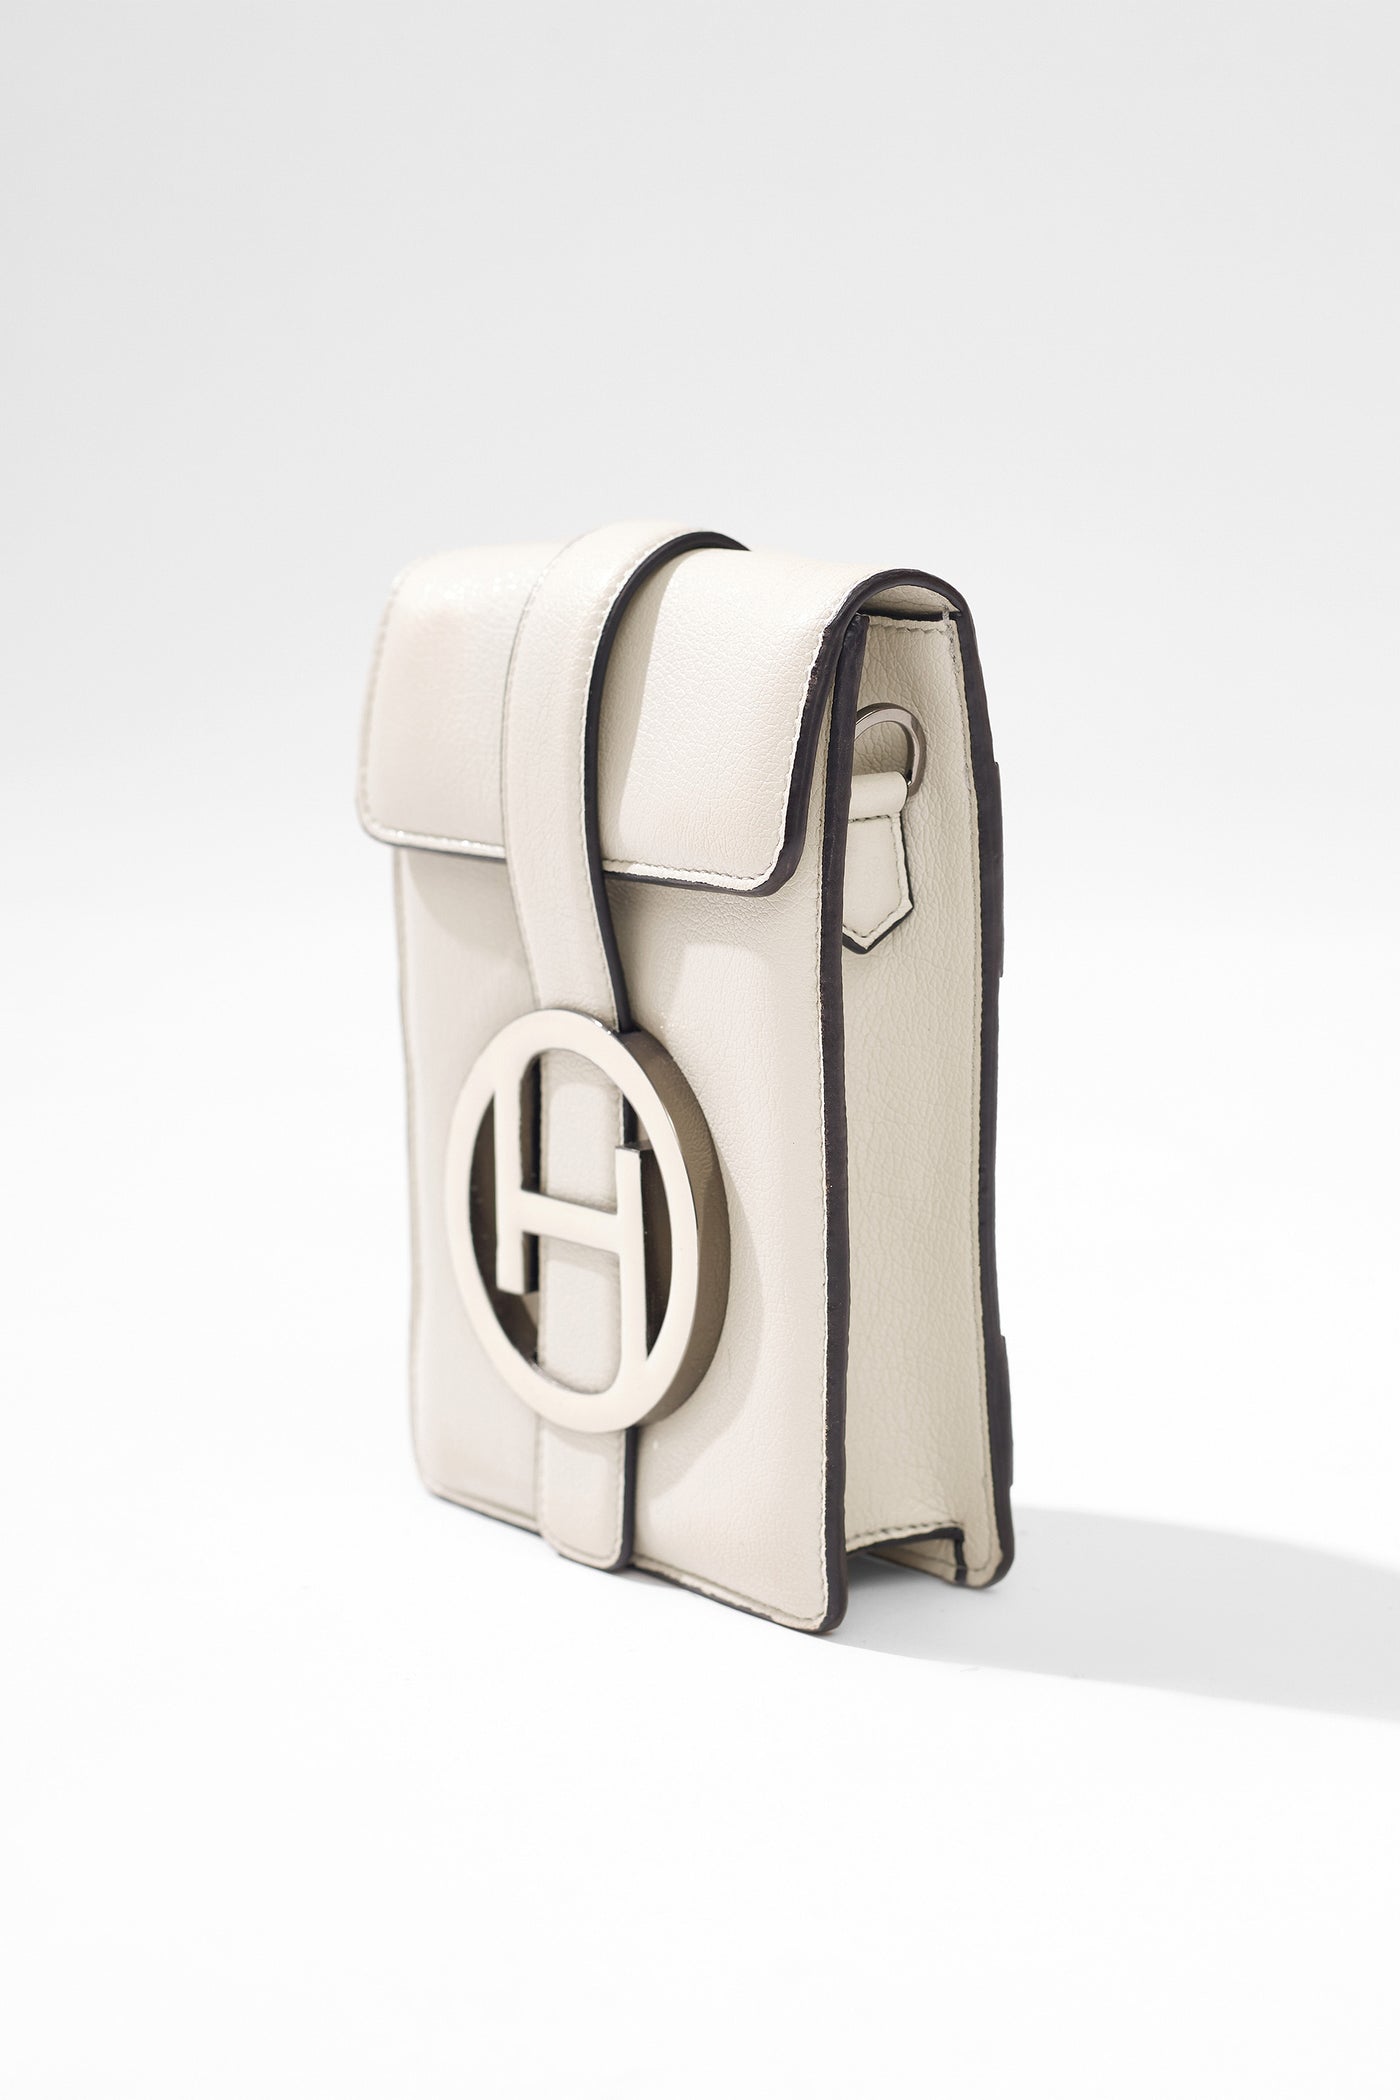 outhouse Dopamine Messenger Bag In Ivory White bags accessories online shopping melange singapore indian designer wear